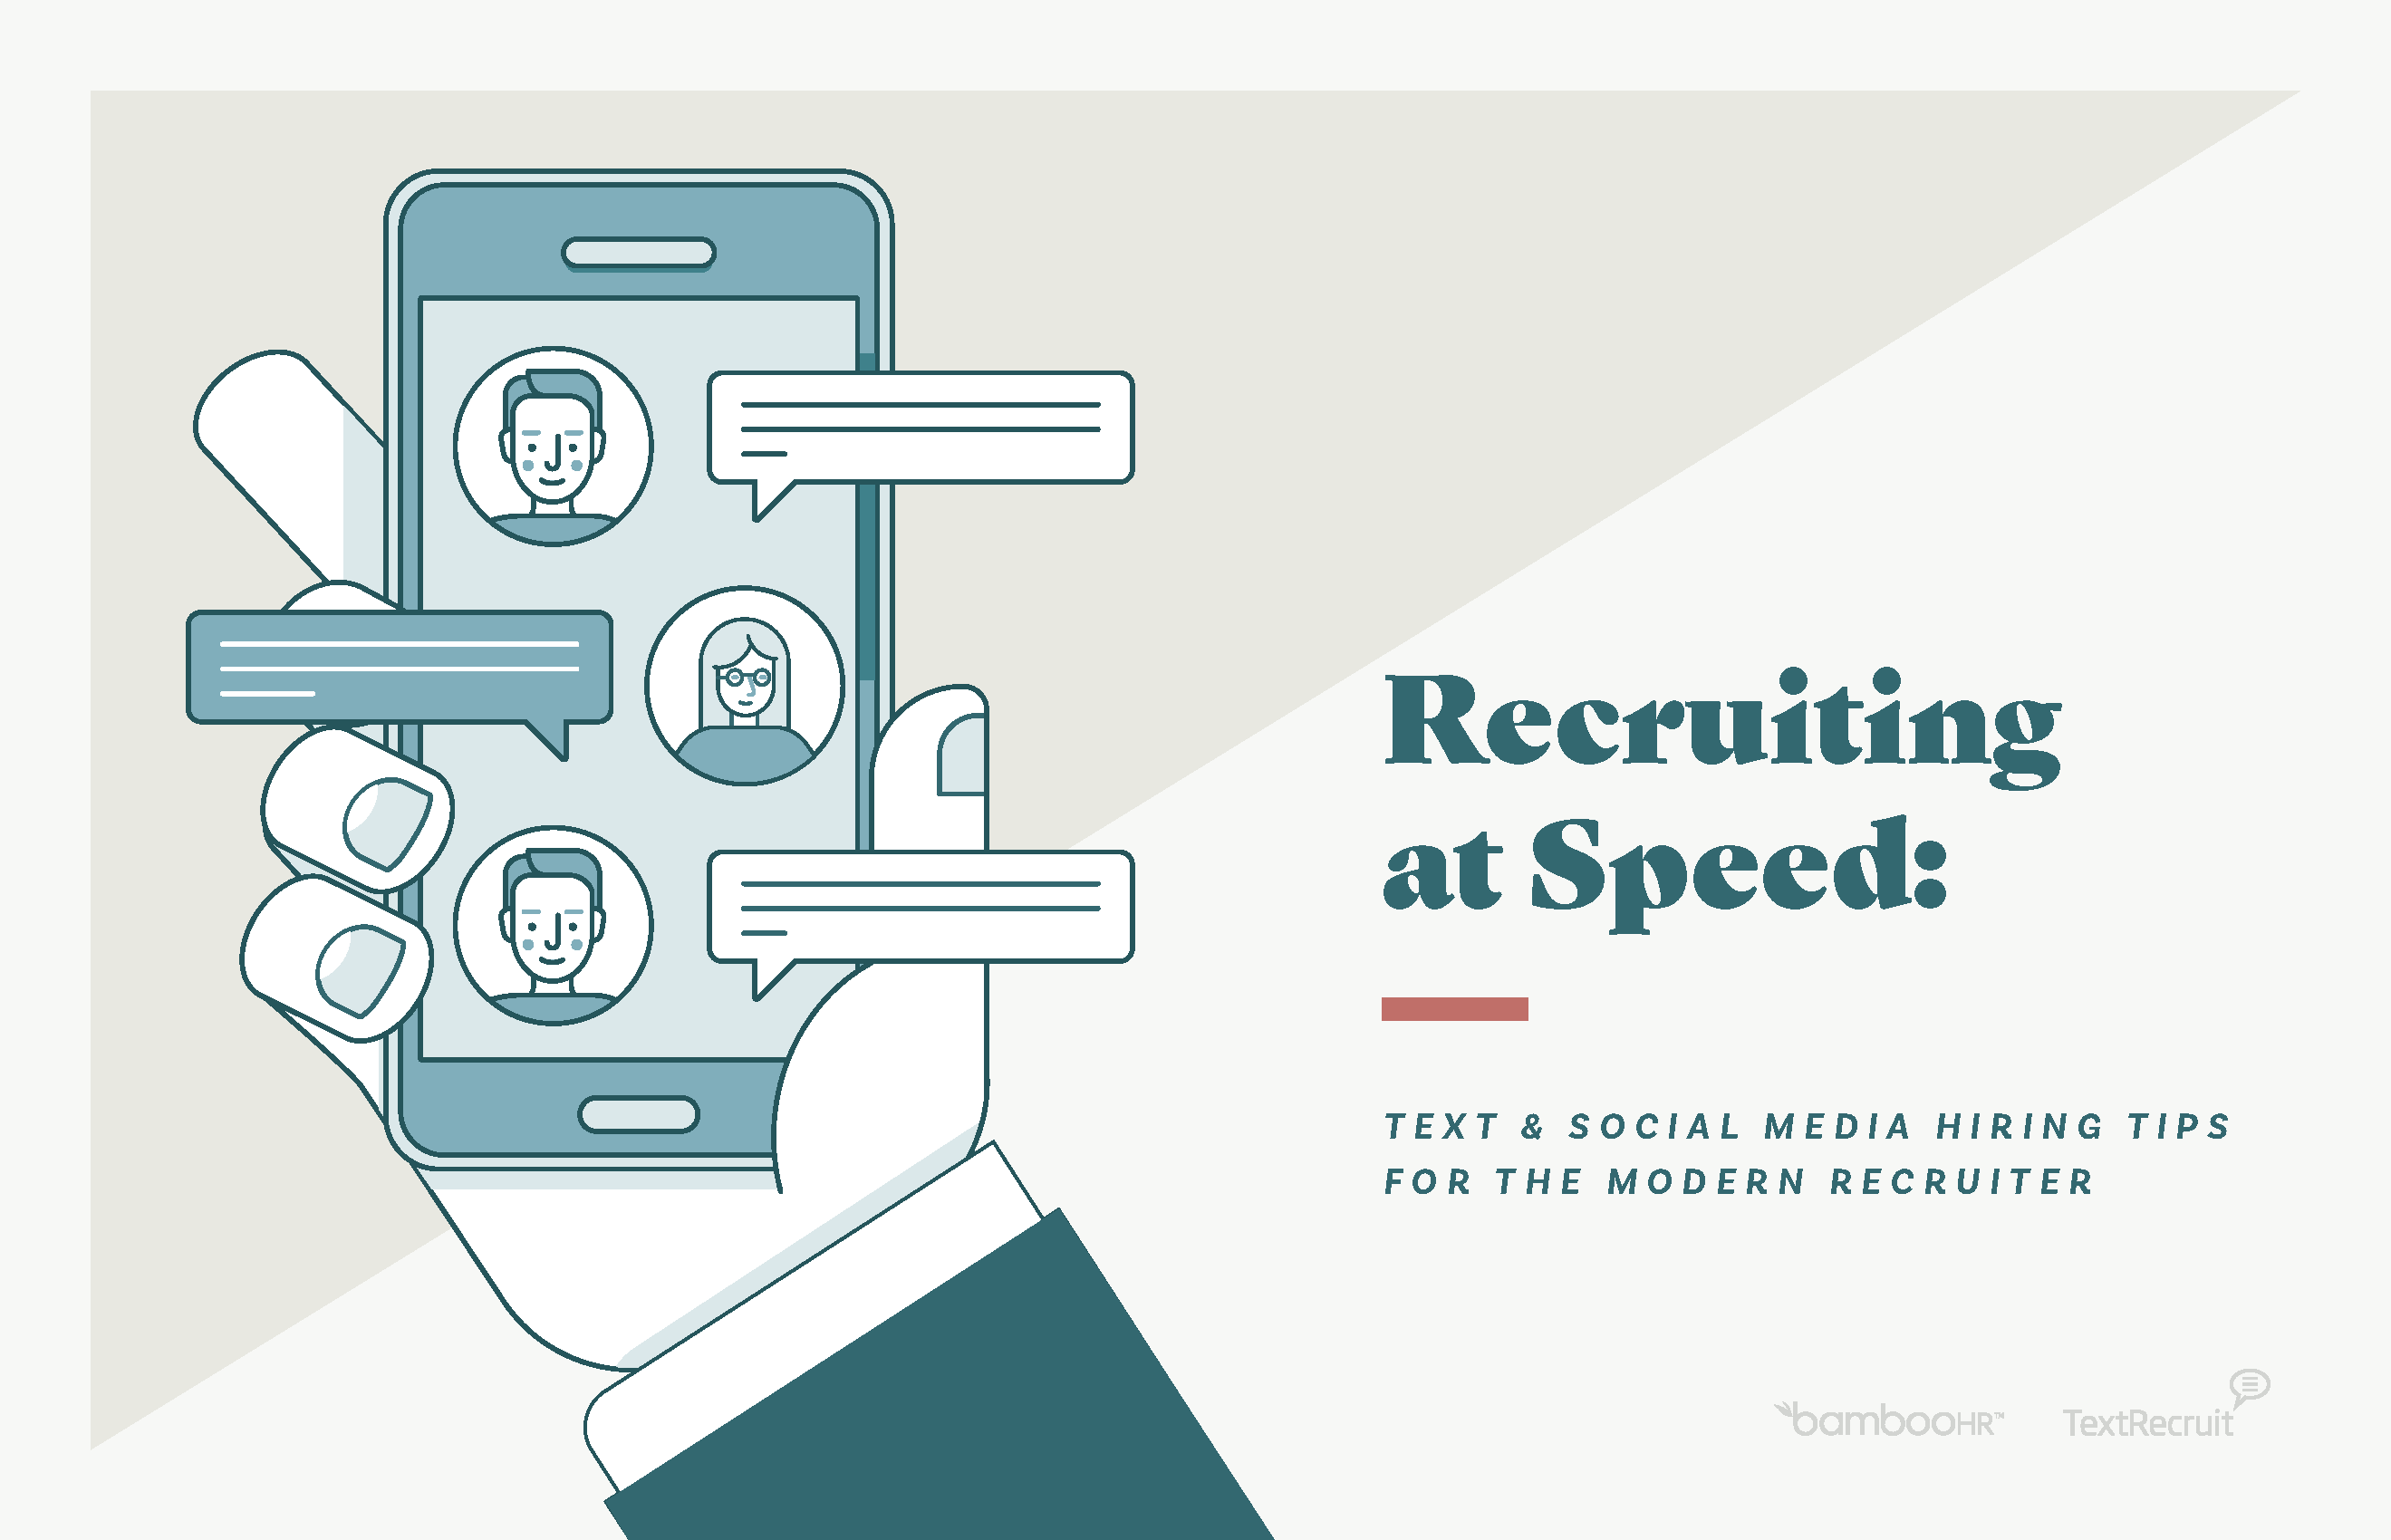 Recruiting at Speed: Text & Social Media Hiring Tips for the Modern Recruiter